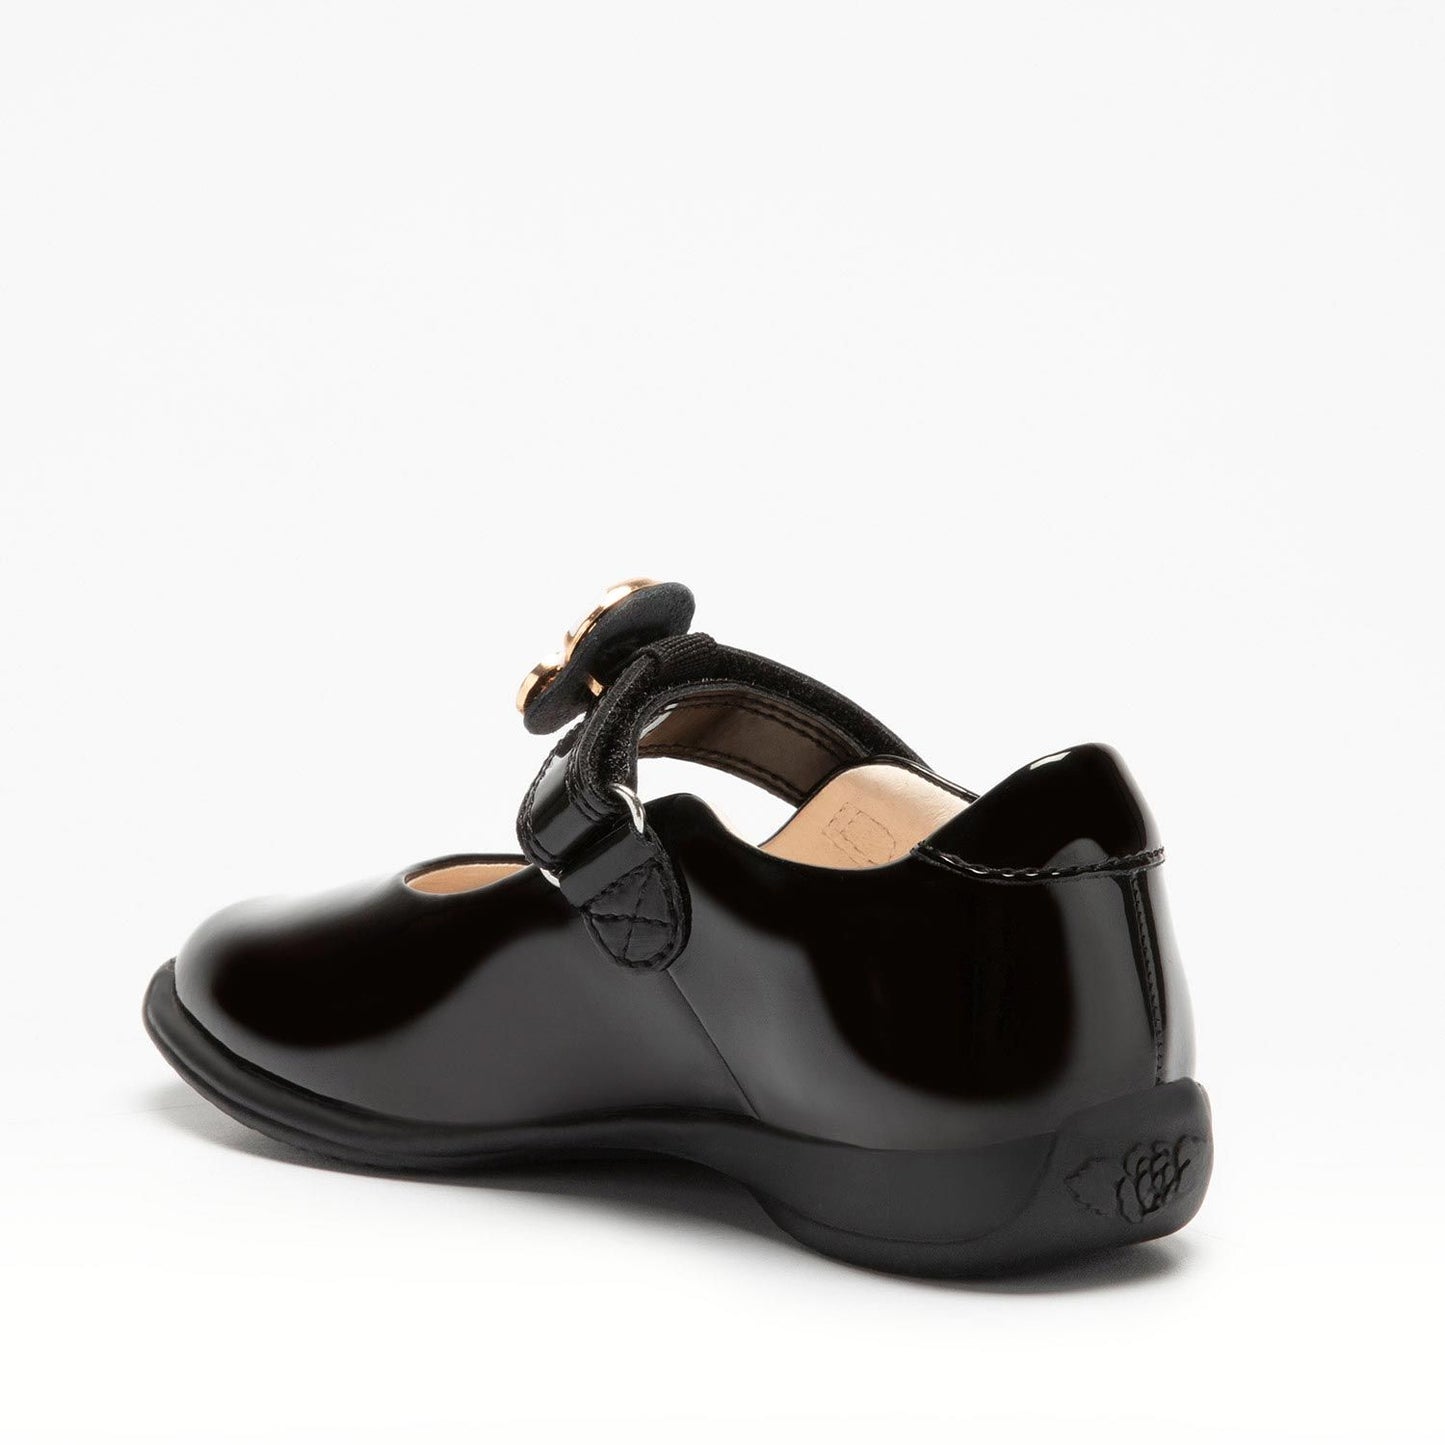 A girls Mary Jane school shoe by Lelli Kelly, style LK8119 Ella, in black patent leather with velcro fastening and detachable gold/white pumpkin carriage. Angled view.